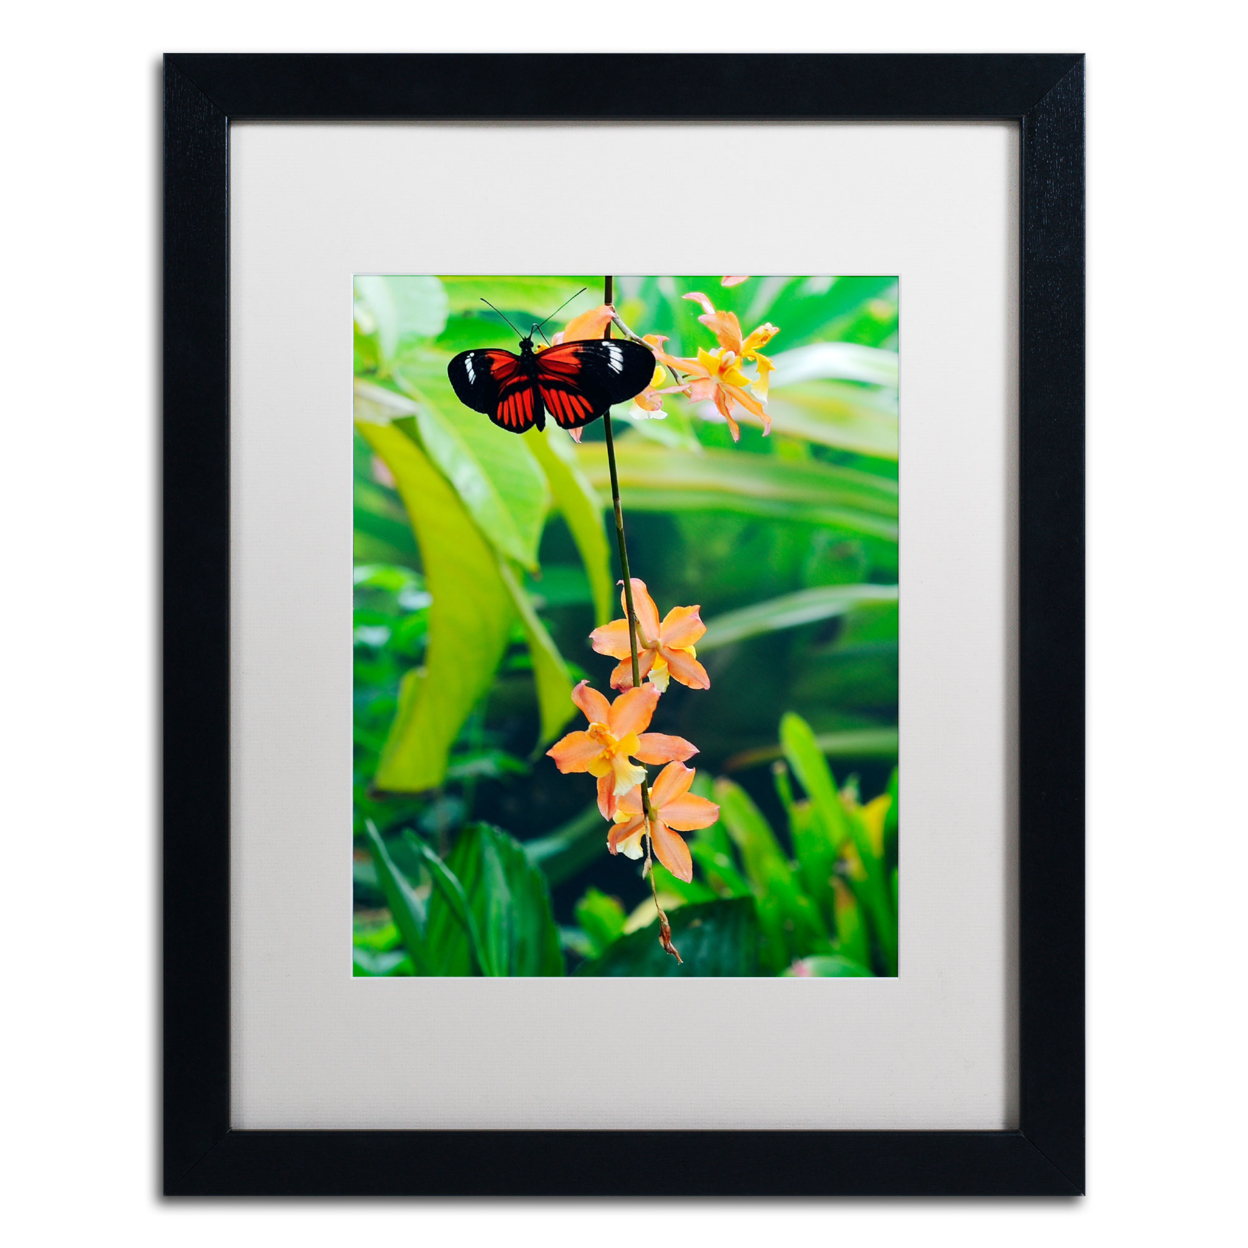 Kurt Shaffer 'Hecale Longwing On Orchid' Black Wooden Framed Art 18 X 22 Inches